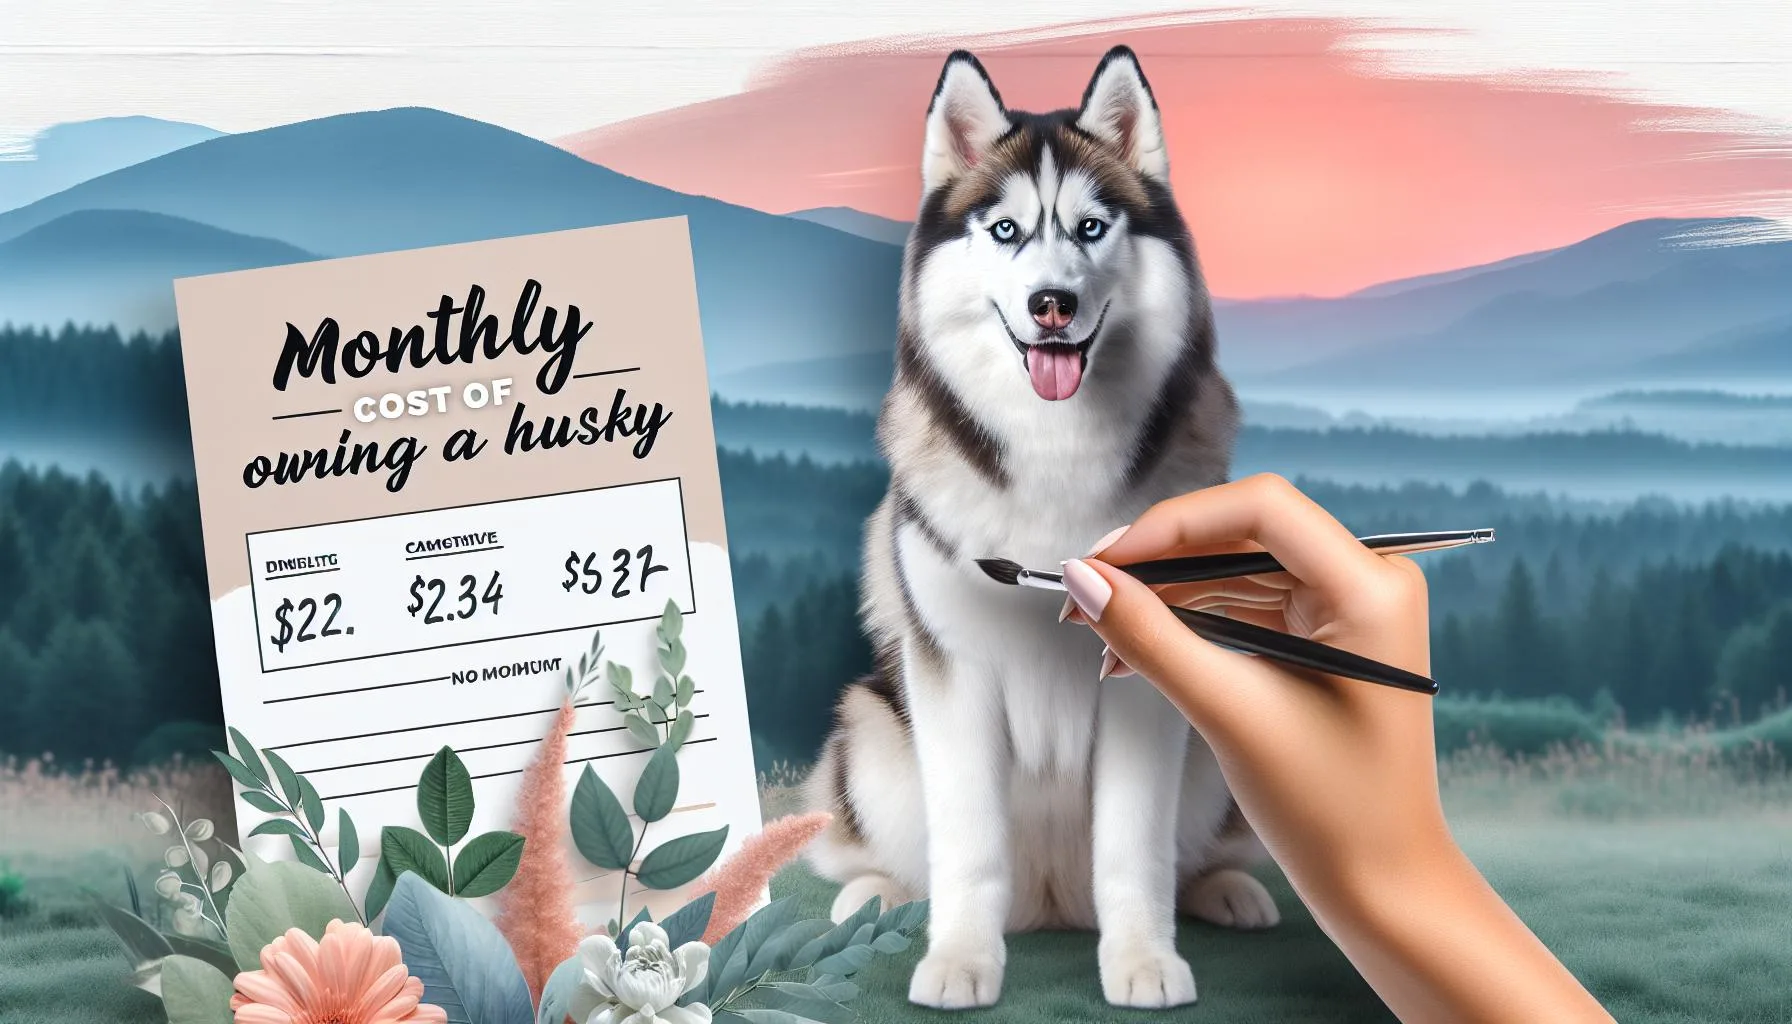 How Much Does a Husky Cost Per Month? Find Out Now!